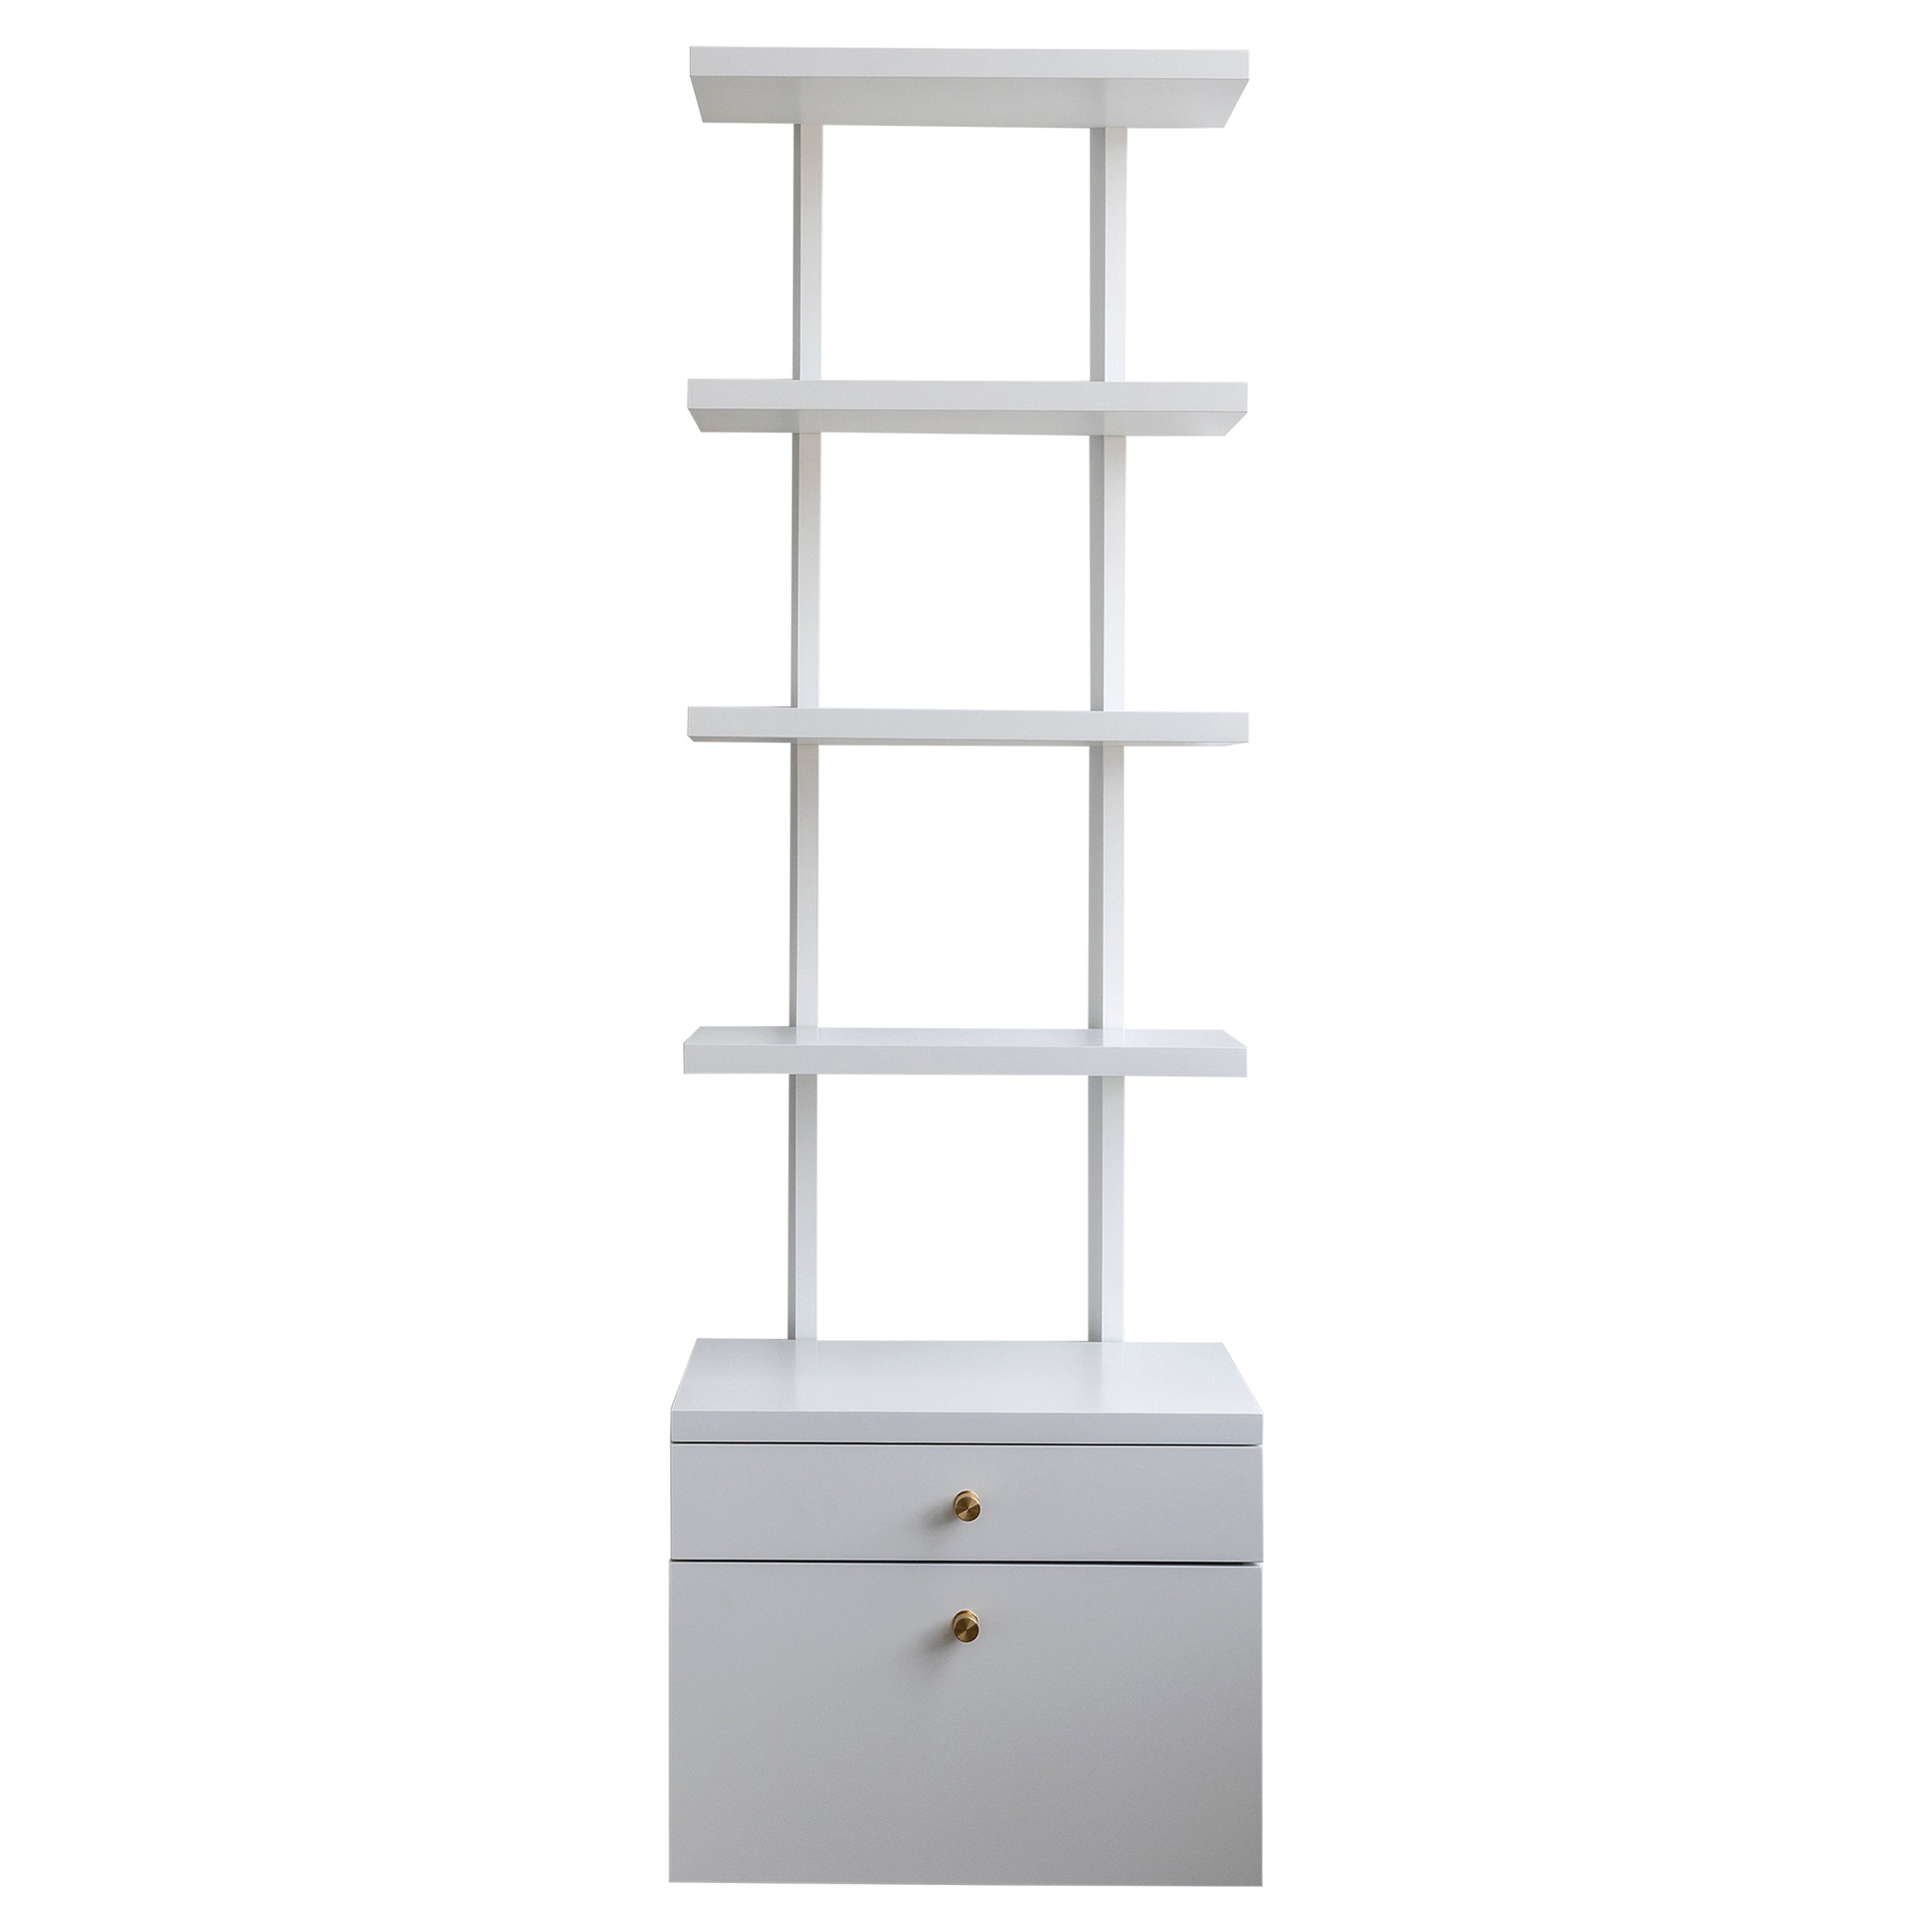 AS6 wall unit 24" wide shelves & drawer cabinet in white lacquer For Sale